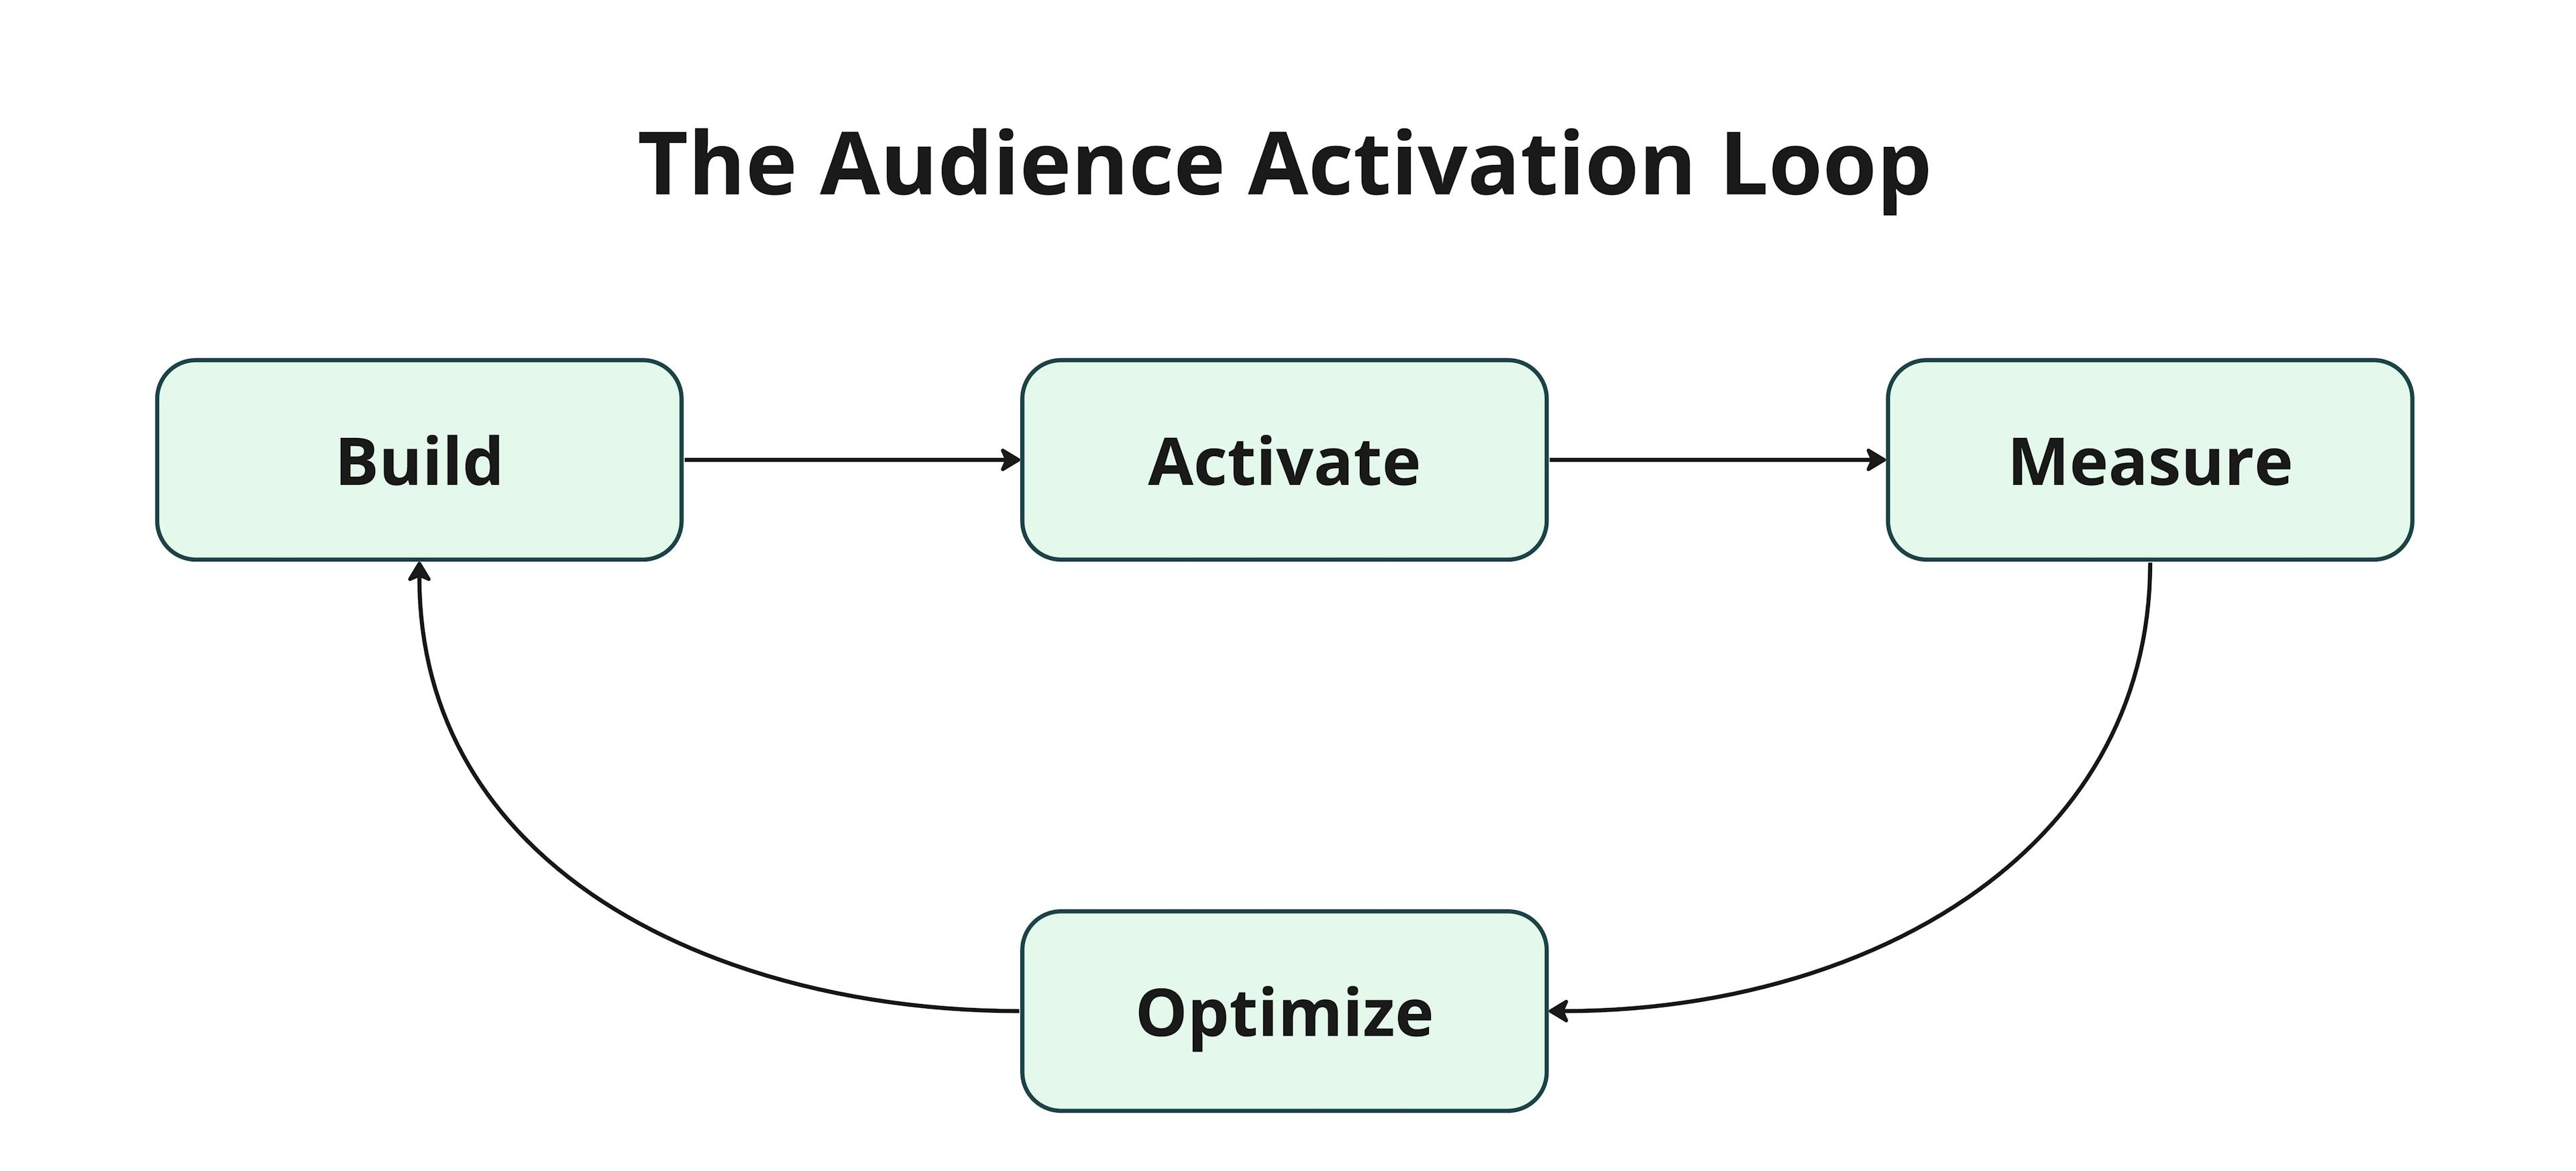 The Audience Activation Loop